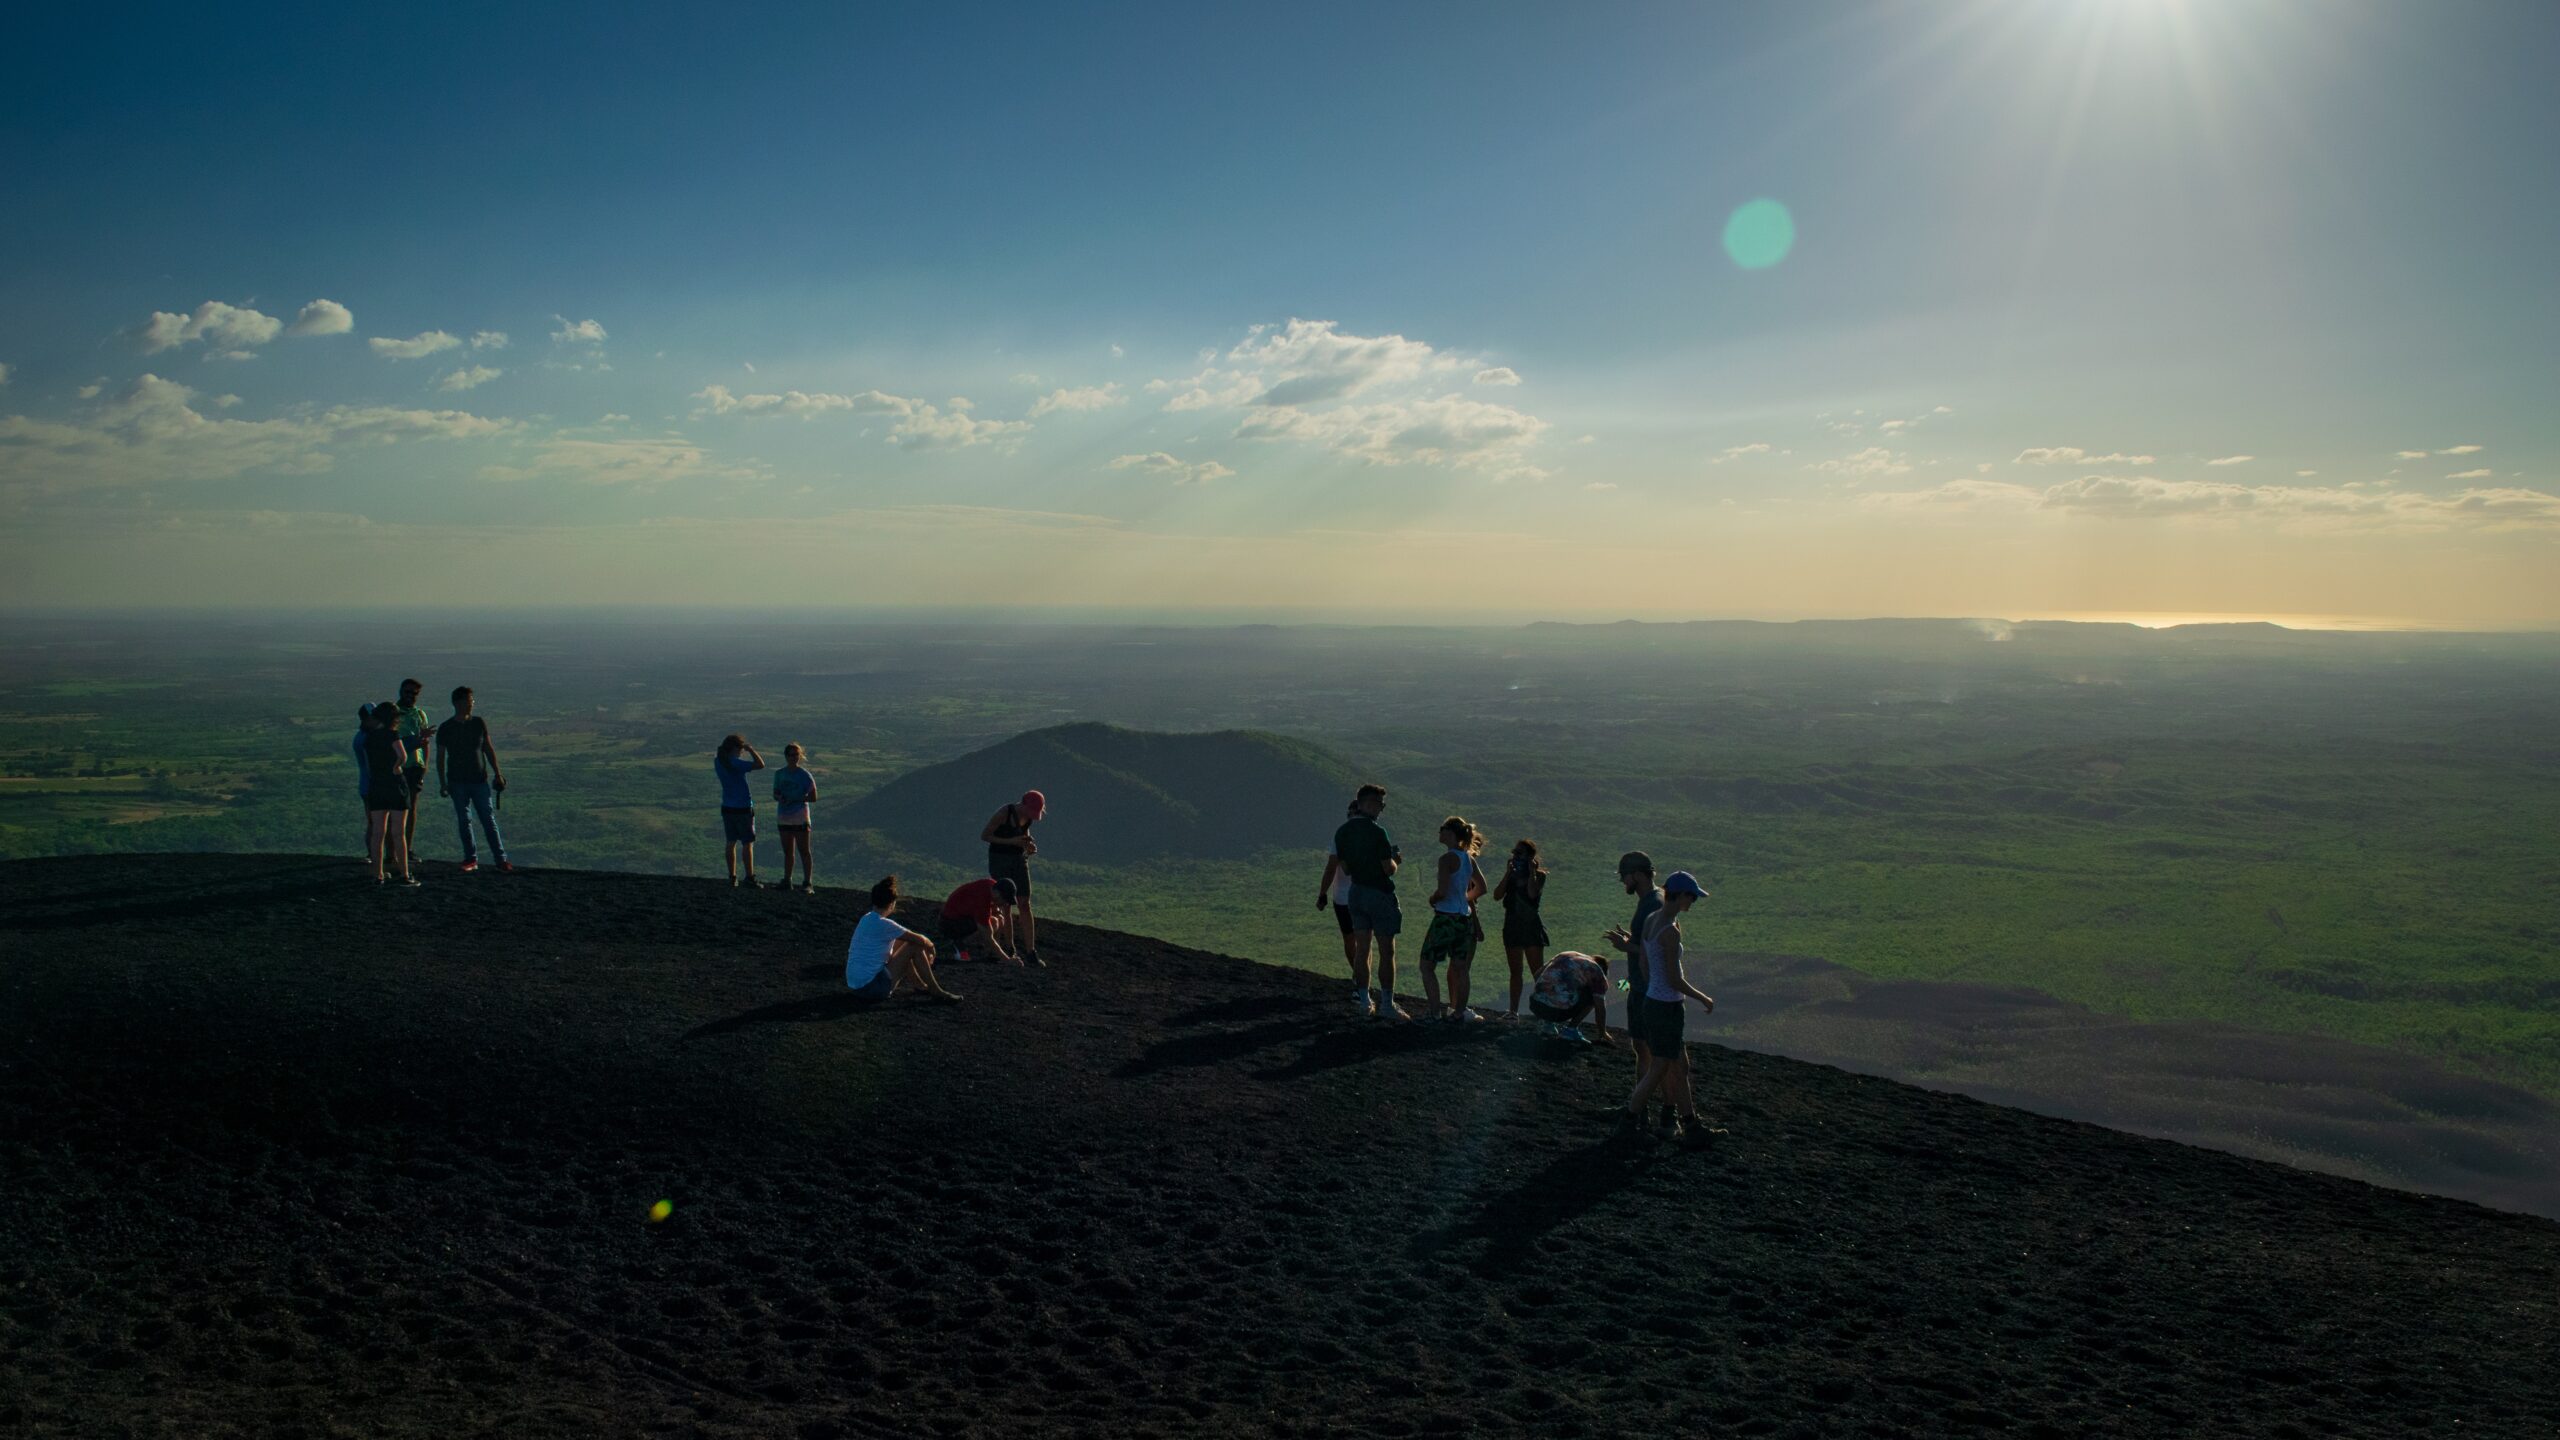 What Are The Secret Viewpoints That Offer Panoramic Vistas Of Nicaragua’s Landscapes?